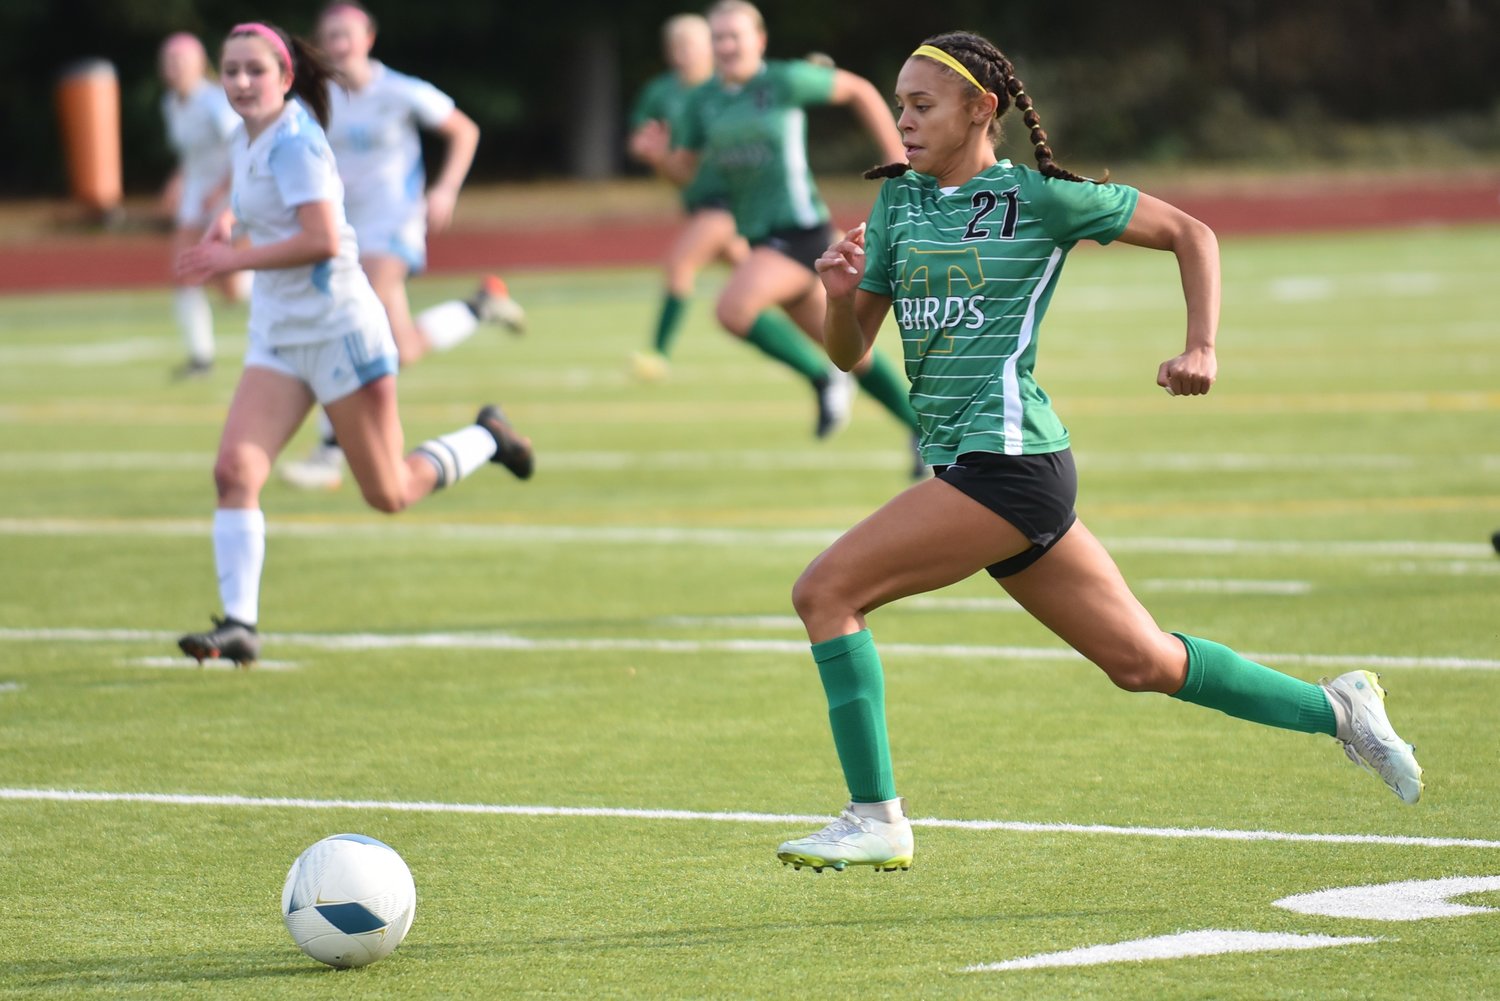 Ava Jones sprints down the wing with the ball during the first half of Tumwater's 6-0 win over Hockinson in the first round of the 2A District 4 tournament on Oct. 29.